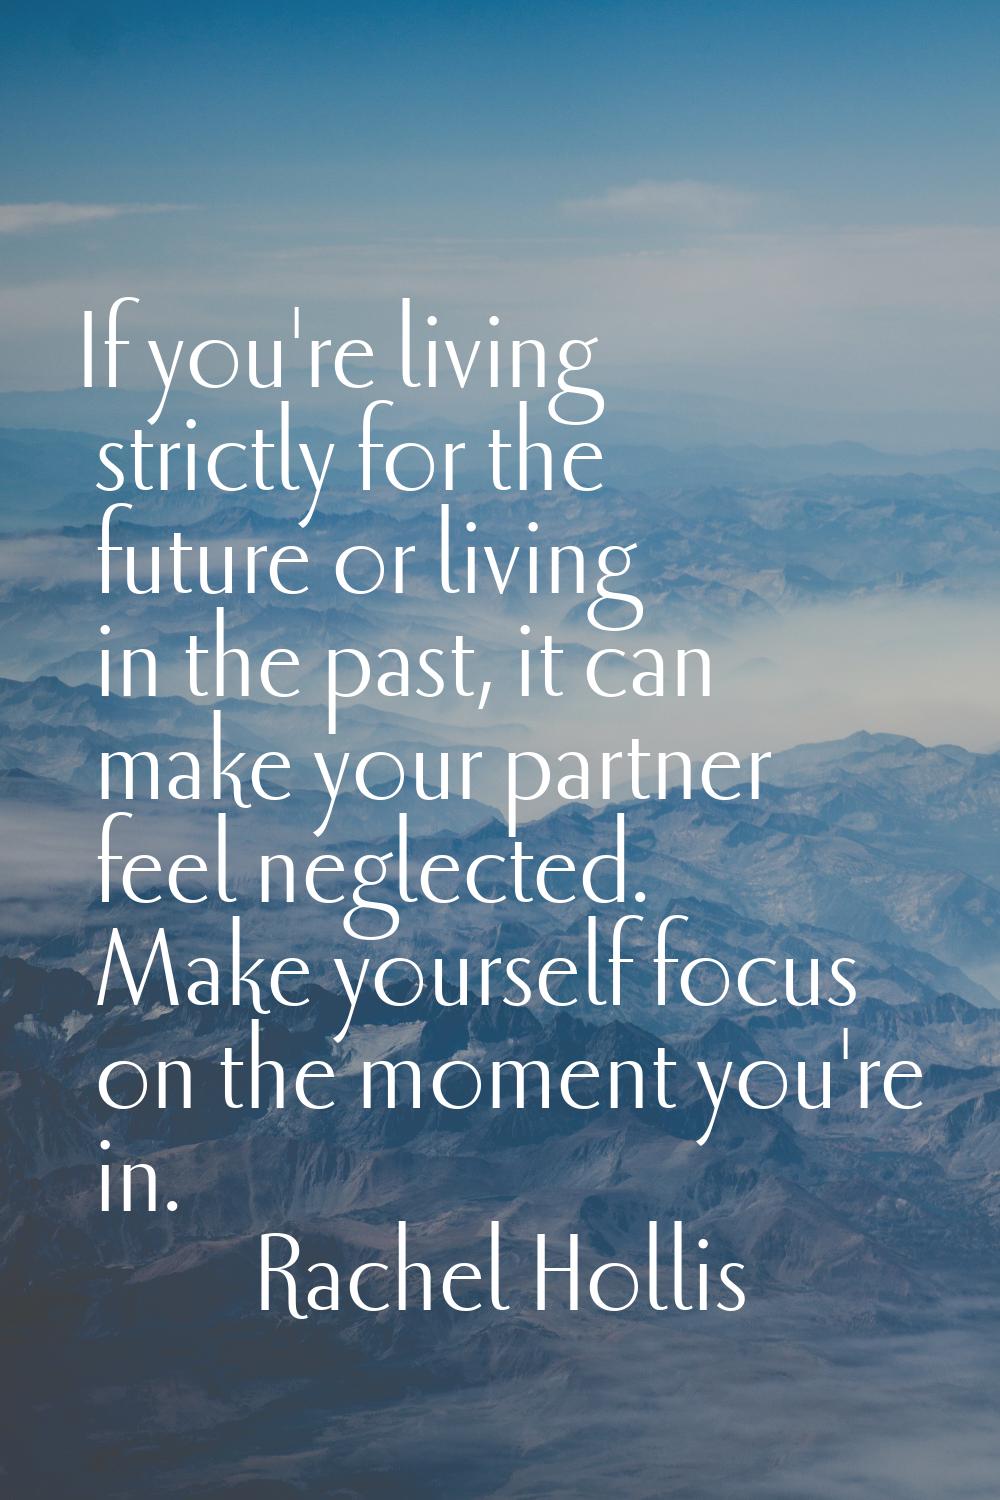 If you're living strictly for the future or living in the past, it can make your partner feel negle